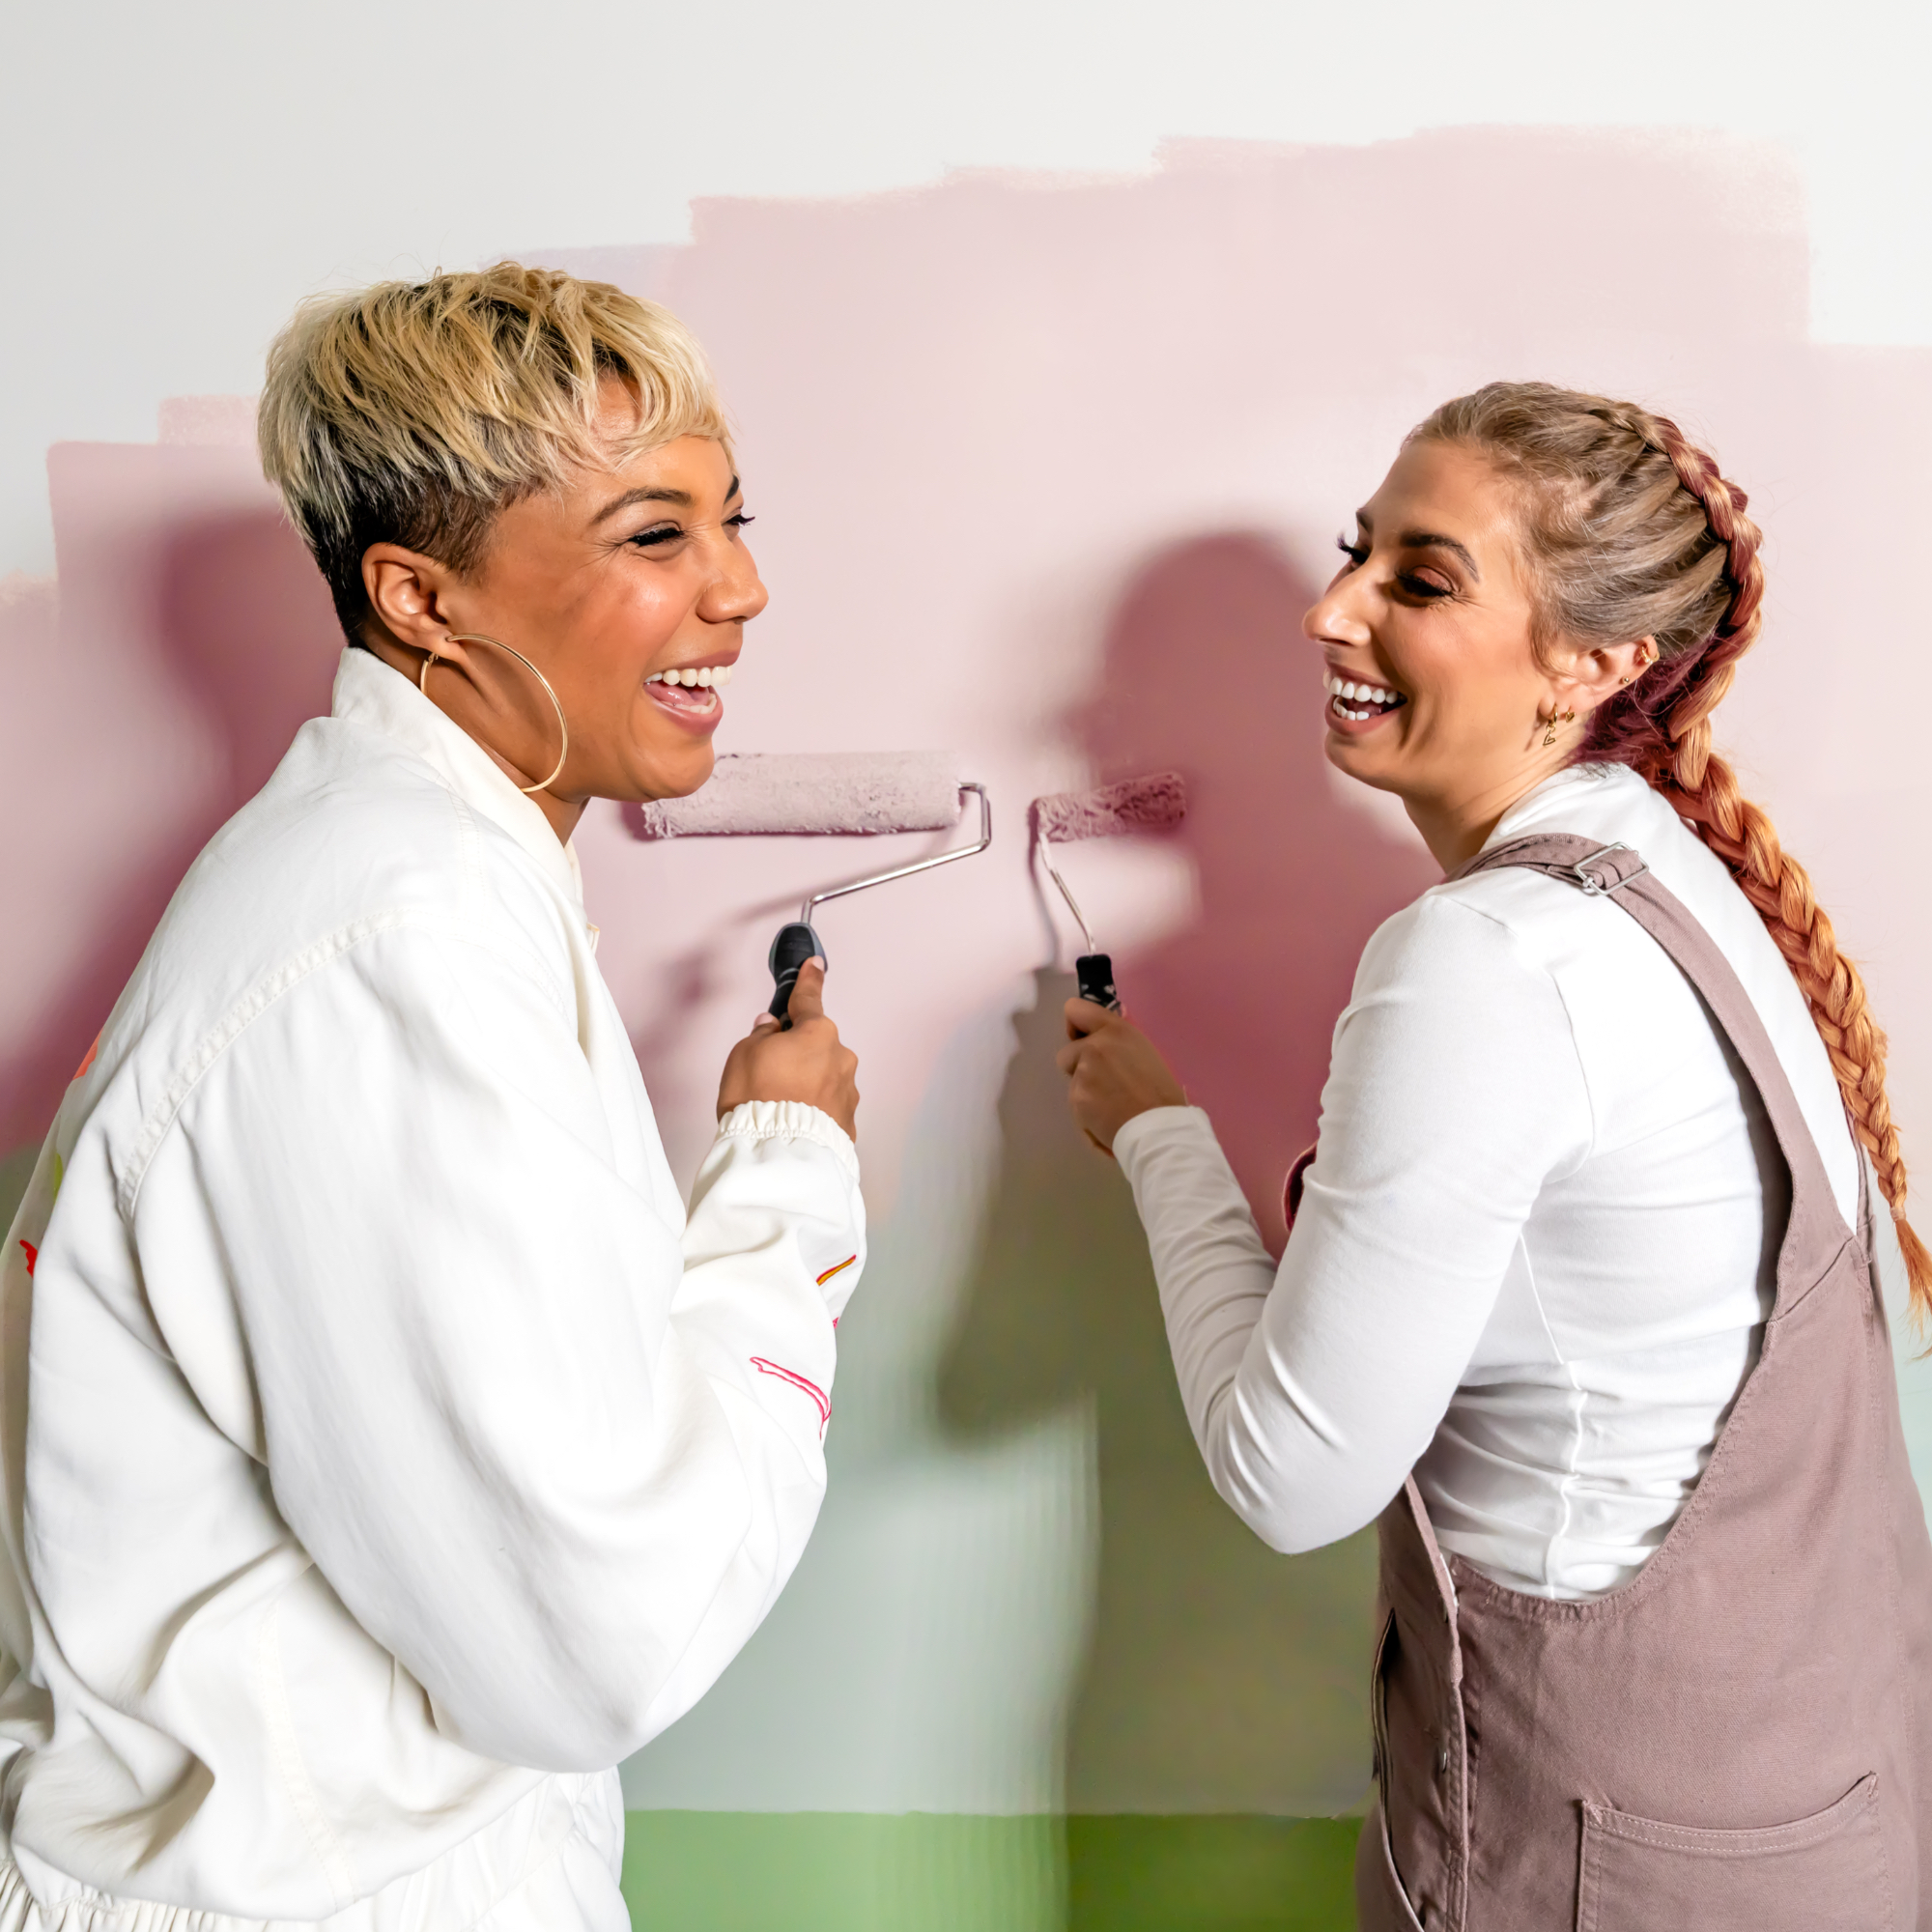 stacey Solomon painting an ombre wall